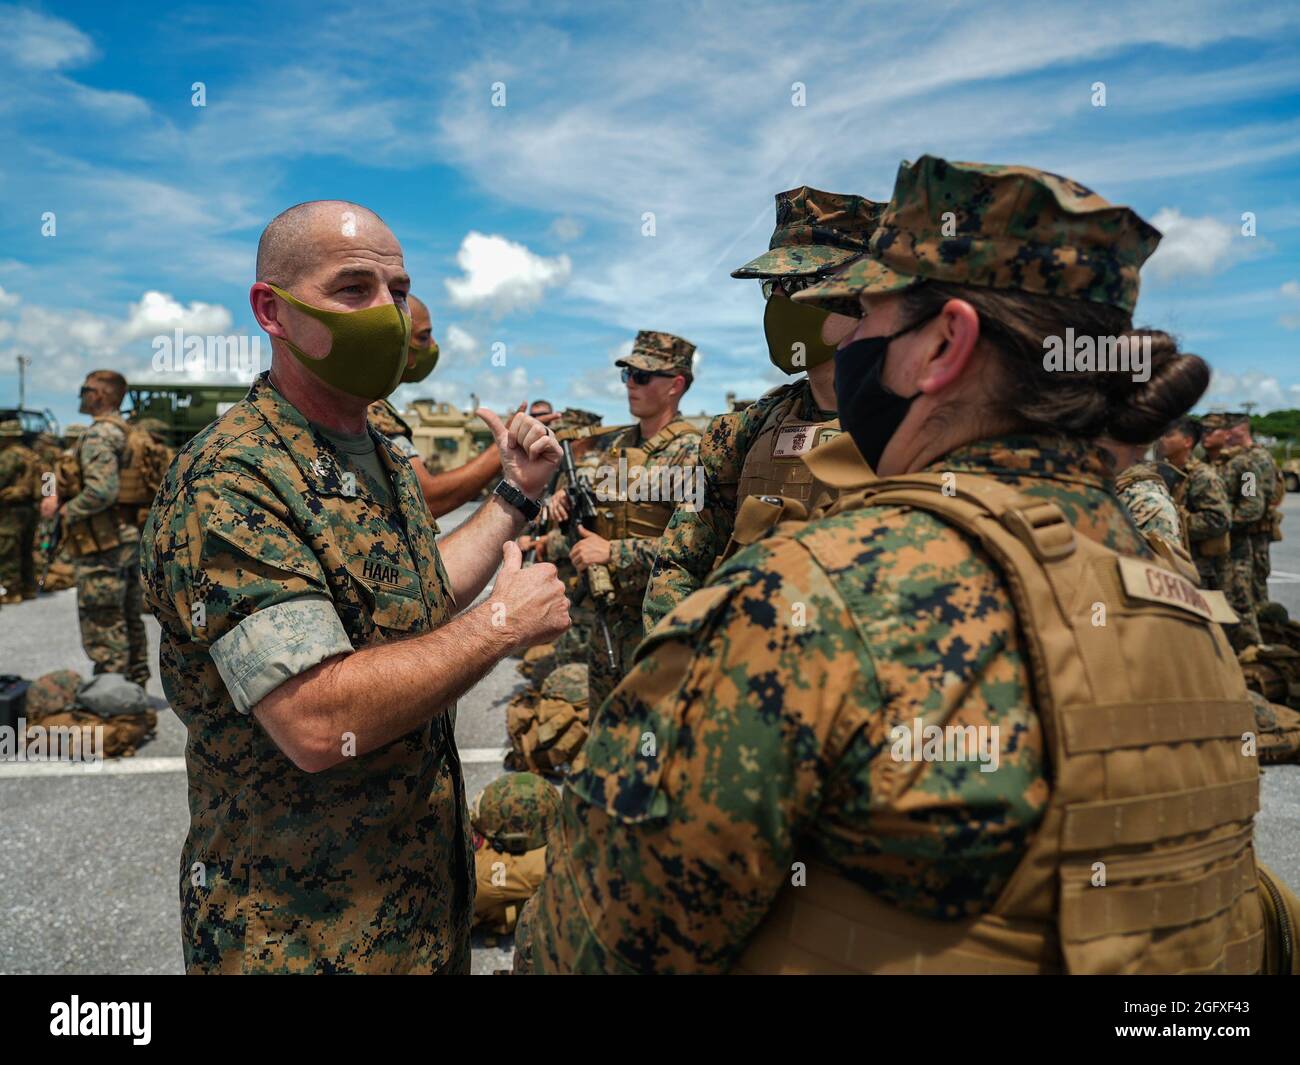 U.S. Marine Corps Col. Christopher Haar, commanding officer of Combat Logistics Regiment 3, 3d Marine Logistics Group, inspects Navy Corpsman during an integrated rapid response inspection at Kadena Air Base, Okinawa, Japan, August 25, 2021. Routine short-notice inspections ensure III MEF Marines remain ready to rapidly deploy and maintain regional security in the Indo-Pacific. 3d MLG, based out of Okinawa, Japan, is a forward deployed combat unit that serves as III Marine Expeditionary Force’s comprehensive logistics and combat service support backbone for operations throughout the Indo-Pacif Stock Photo